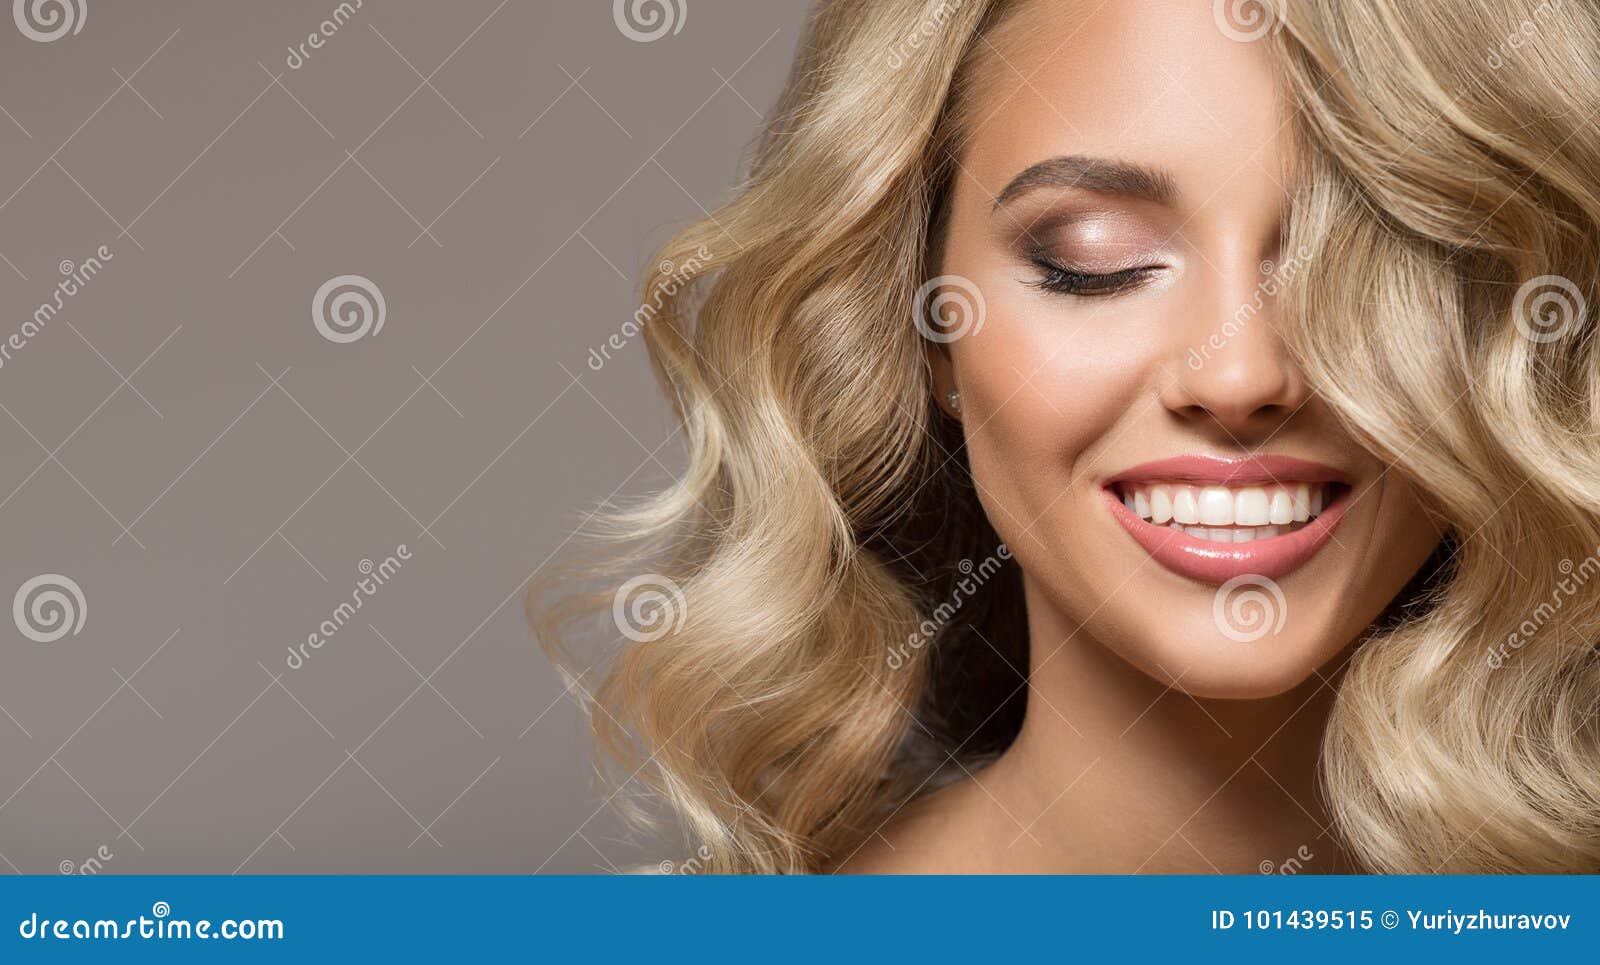 blonde woman with curly beautiful hair smiling